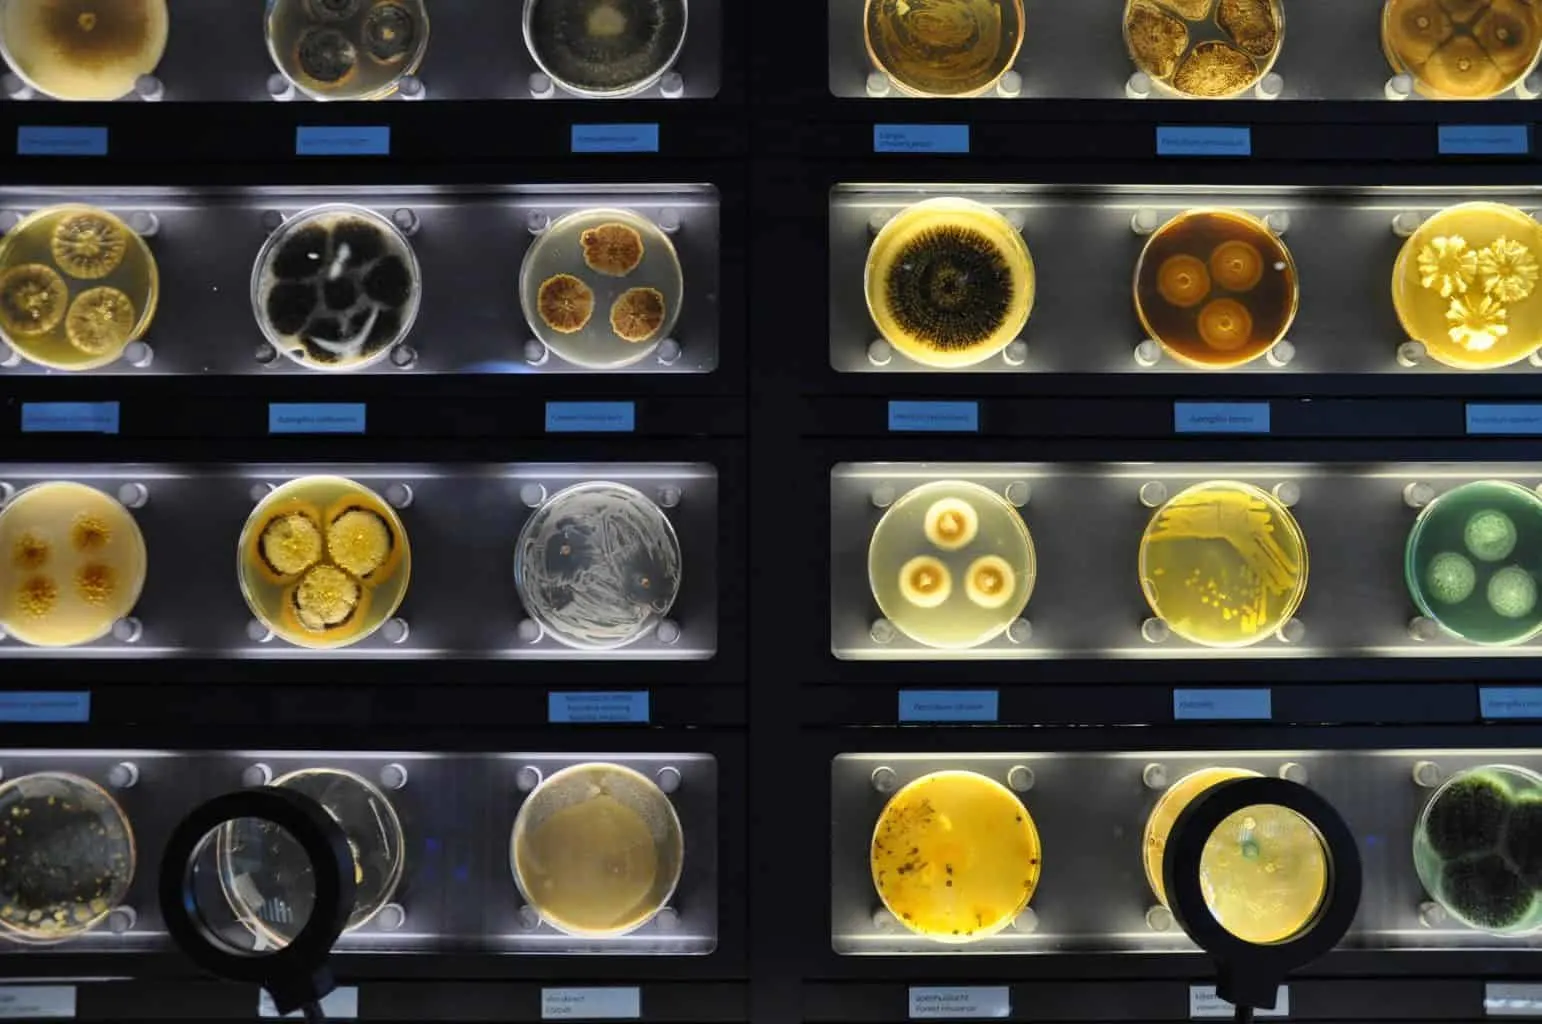 The diverse array of microbes you'll find at the Micropia museum in Amsterdam (image sourced from 